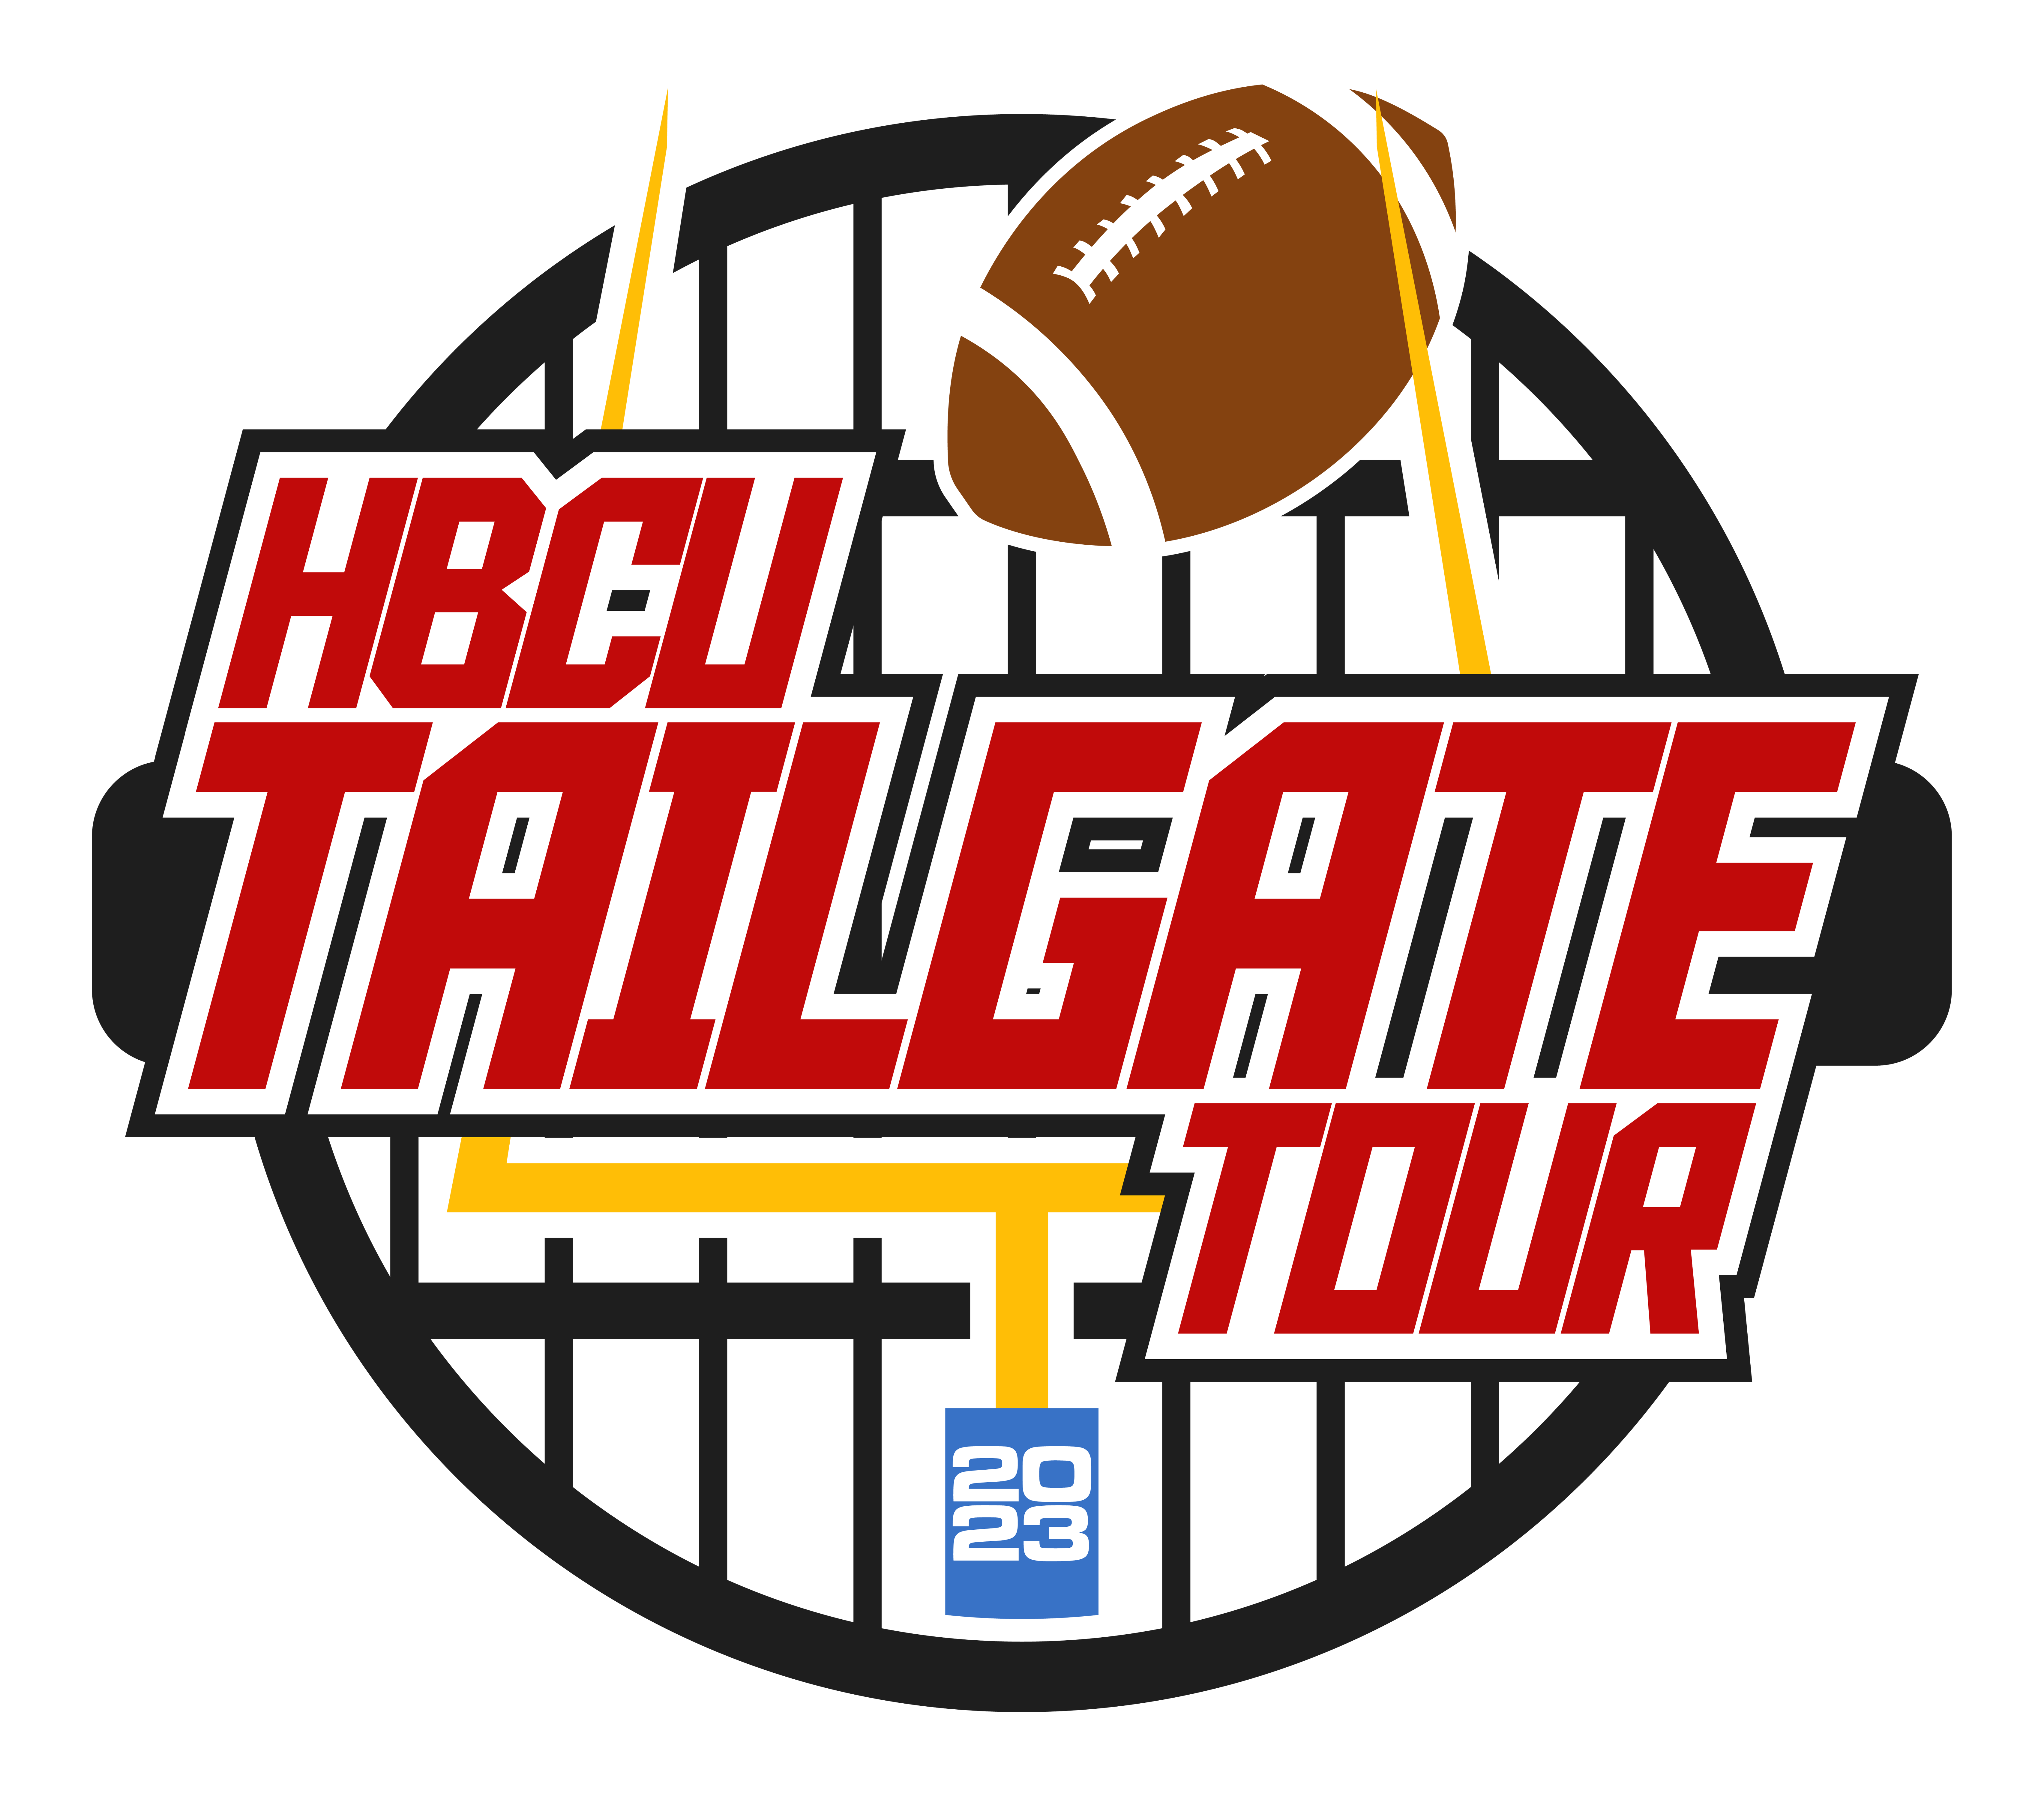 HBCU Tailgate Tour logo with football and goalposts